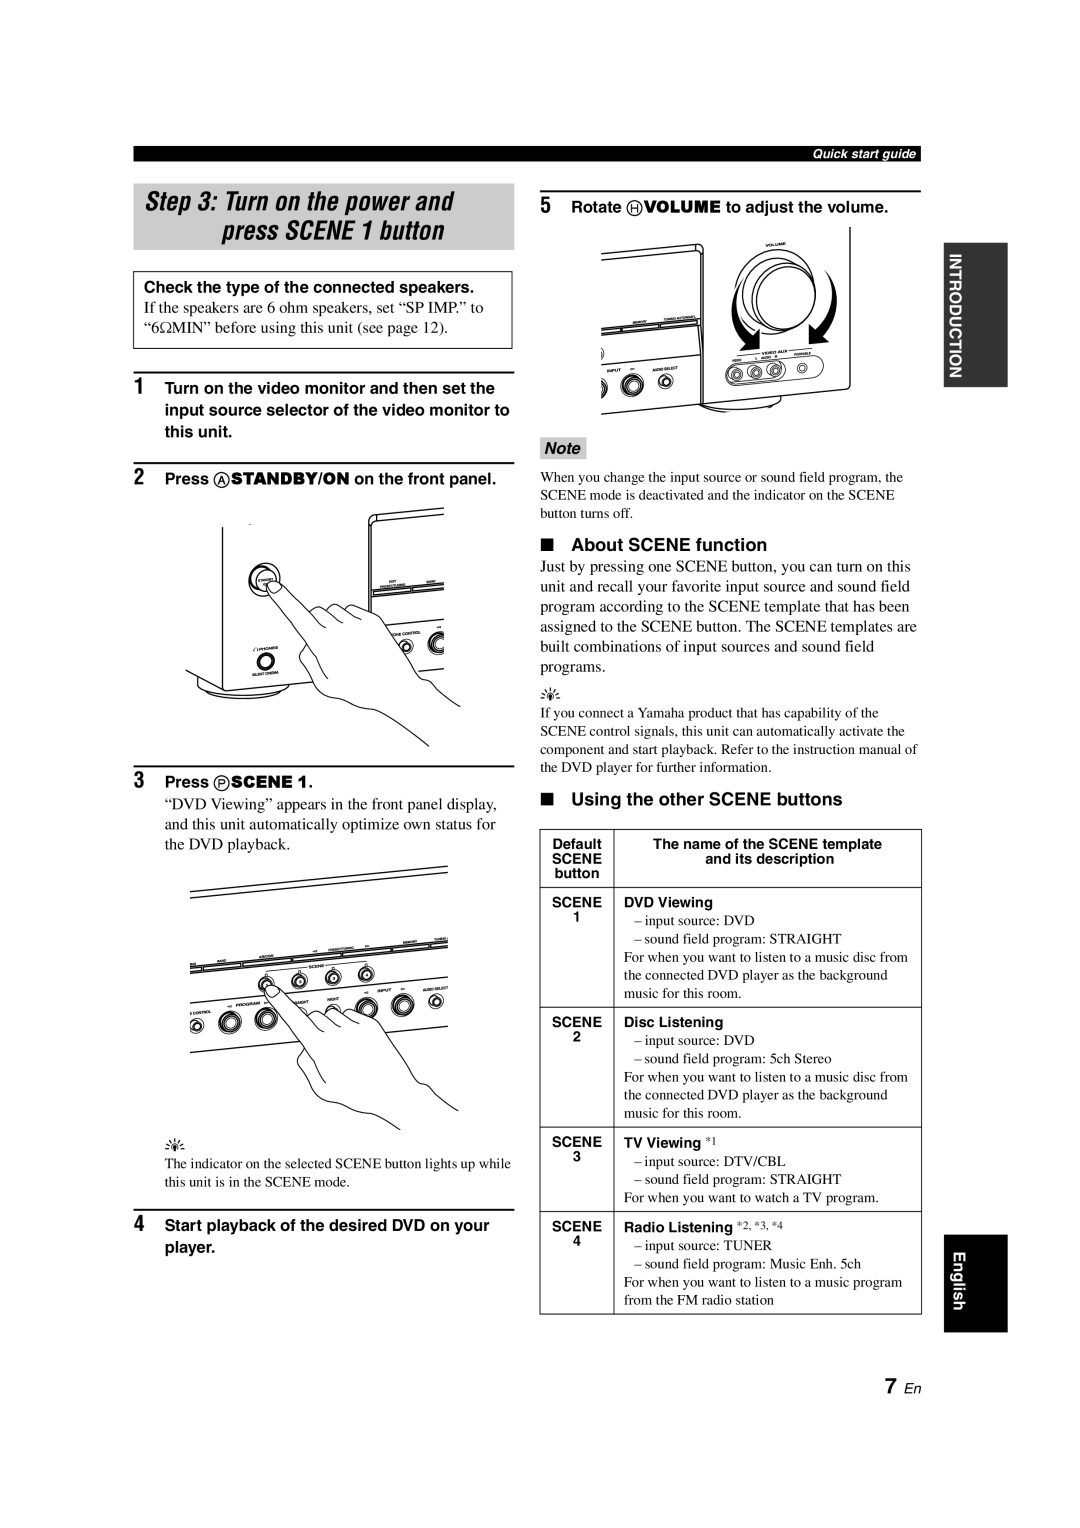 Yamaha HTR-6130 owner manual 7 En, About SCENE function, Using the other SCENE buttons 